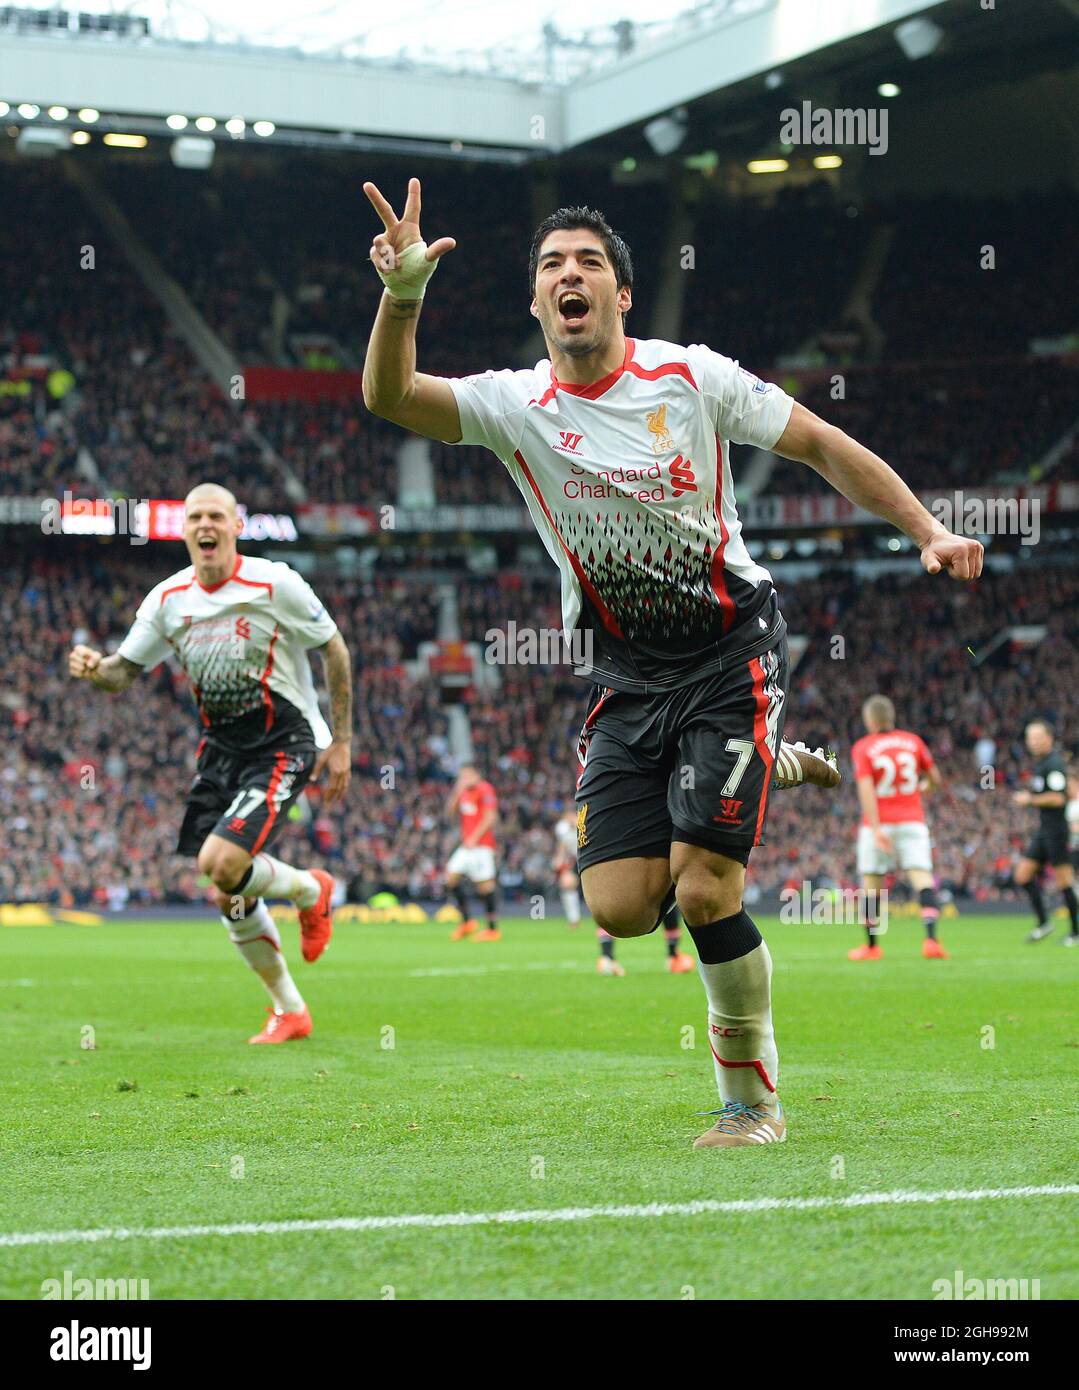 Luis Suarez of Liverpool celebrates scoring the third goal during the Barclays Premier League match between Manchester Utd and Liverpool at Old Trafford Stadium in Manchester, England on March 16, 2014. Pic Simon Bellis Stock Photo